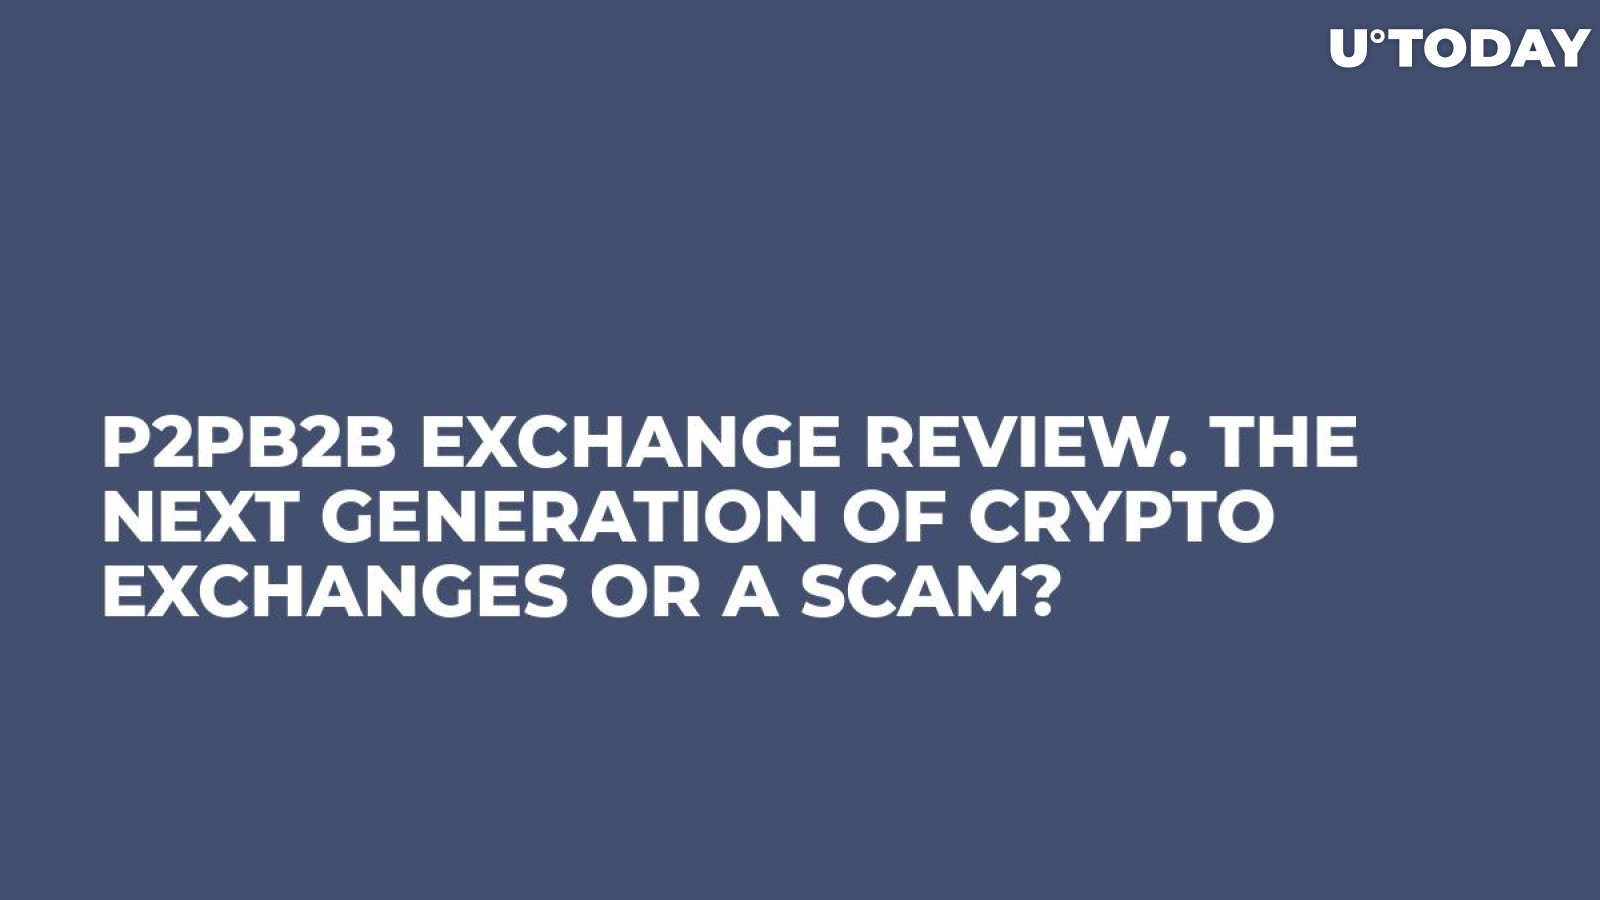 P2PB2B Exchange Review. The Next Generation of Crypto Exchanges or a Scam?